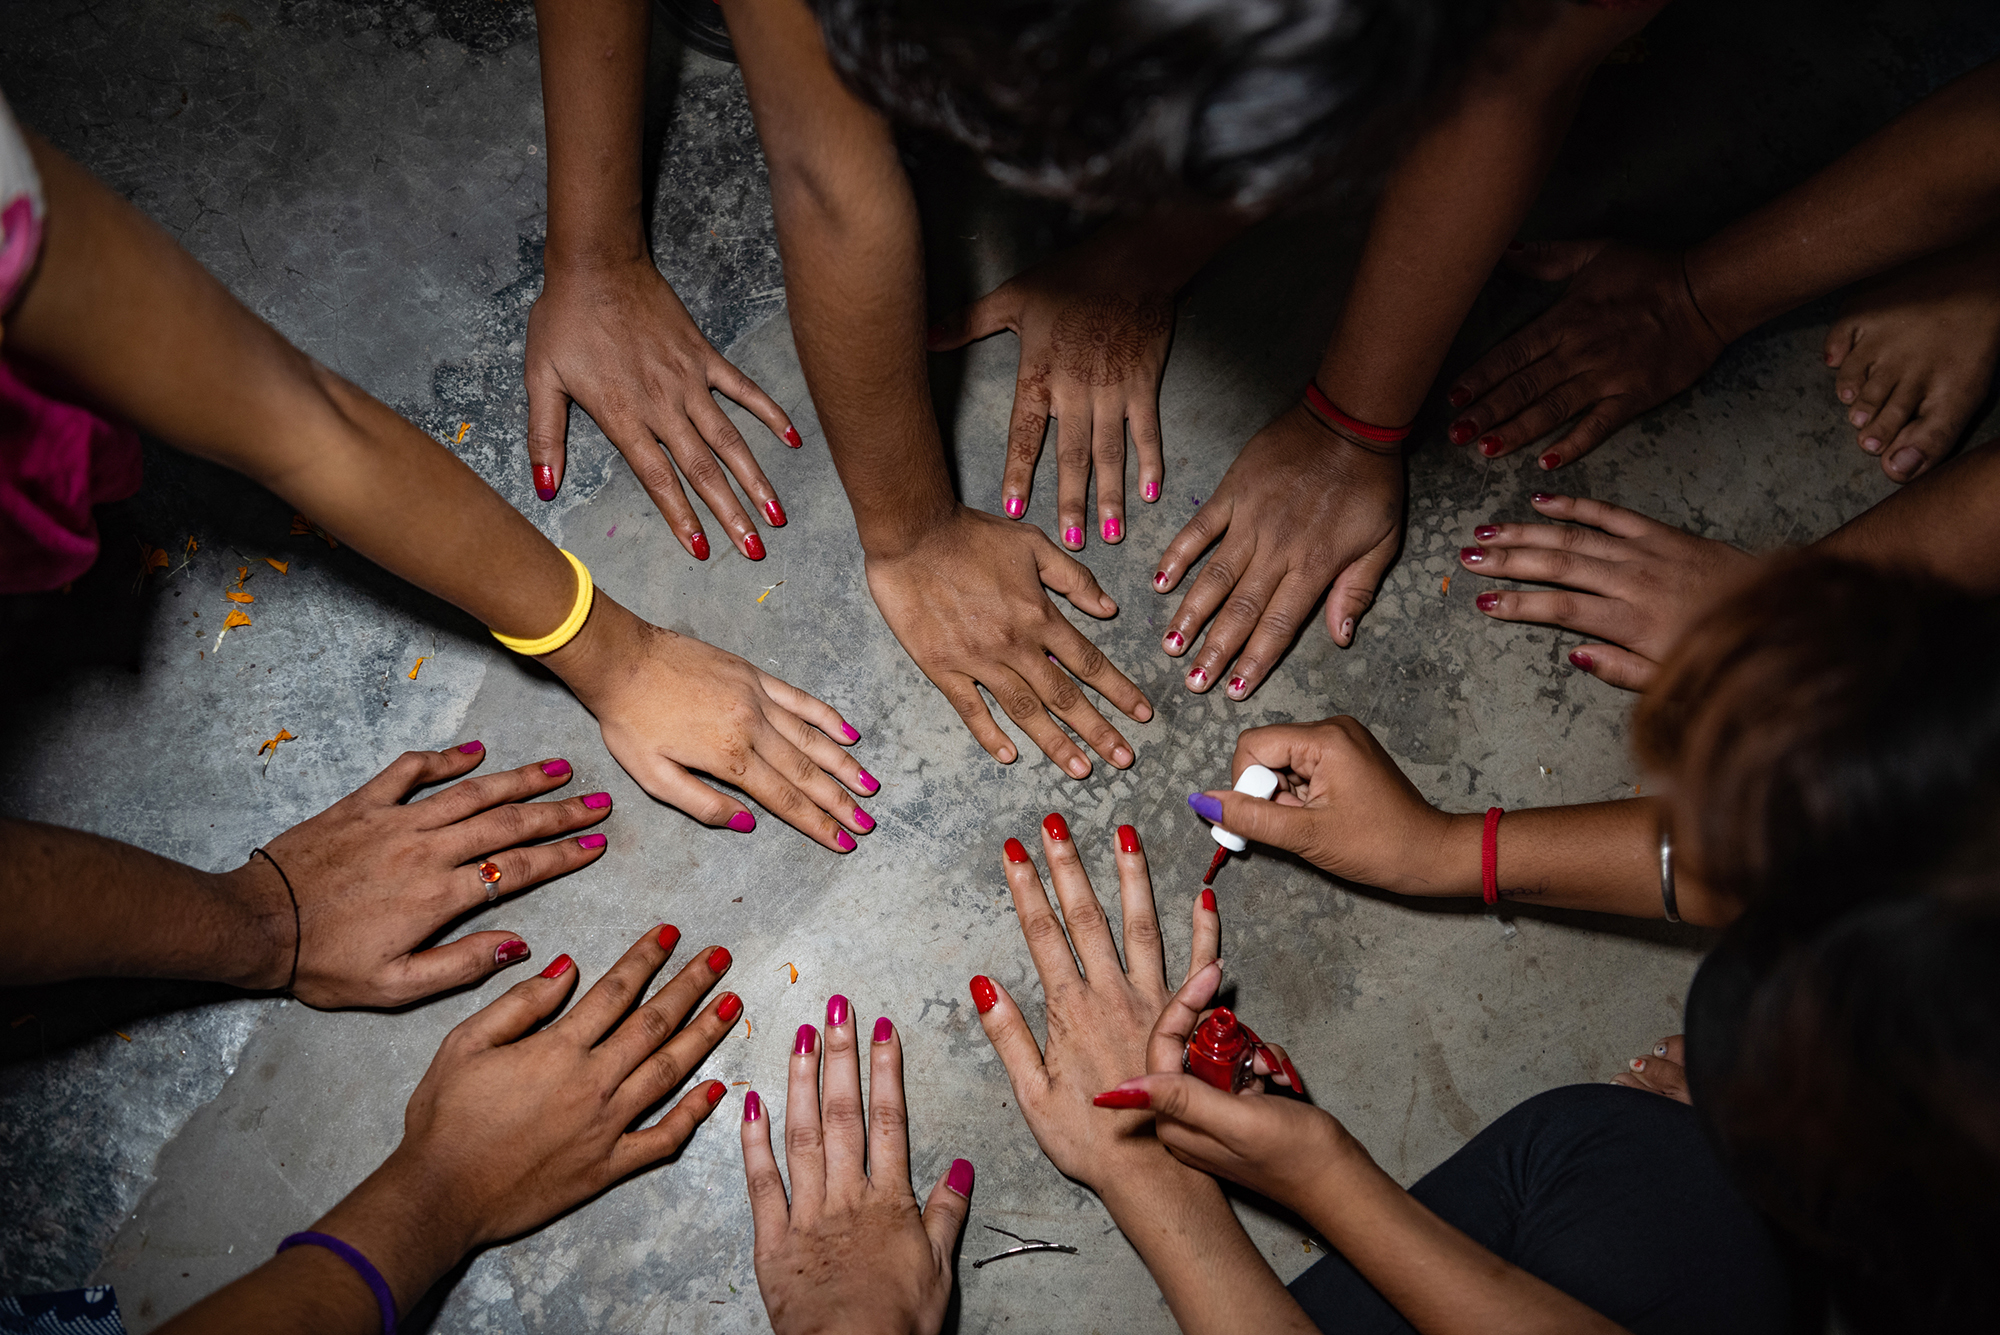 A group of women paint their nails, Bangladesh